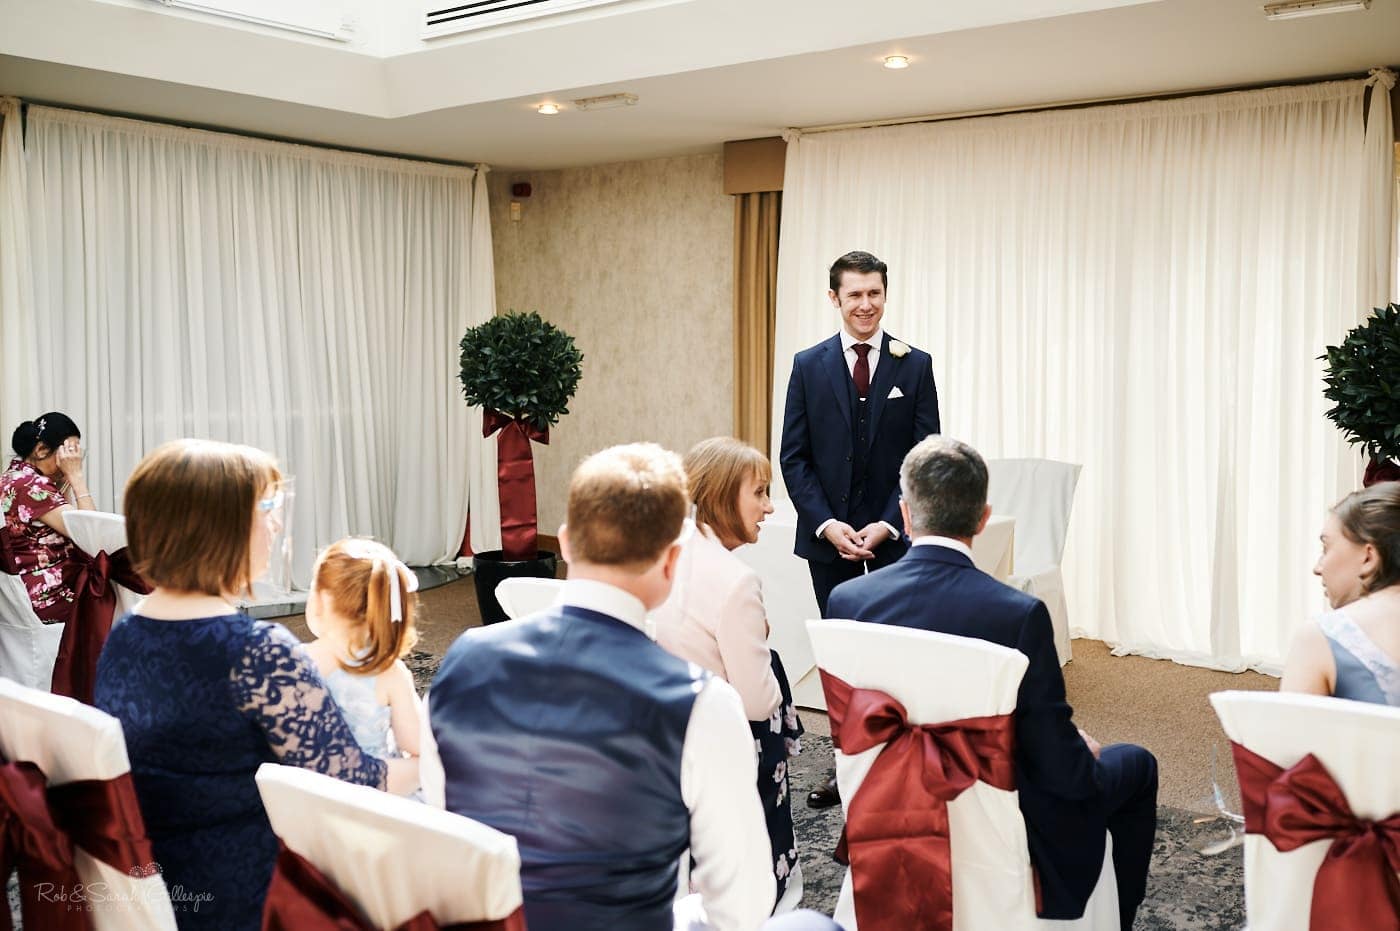 Groom chats to guests before wedding ceremony